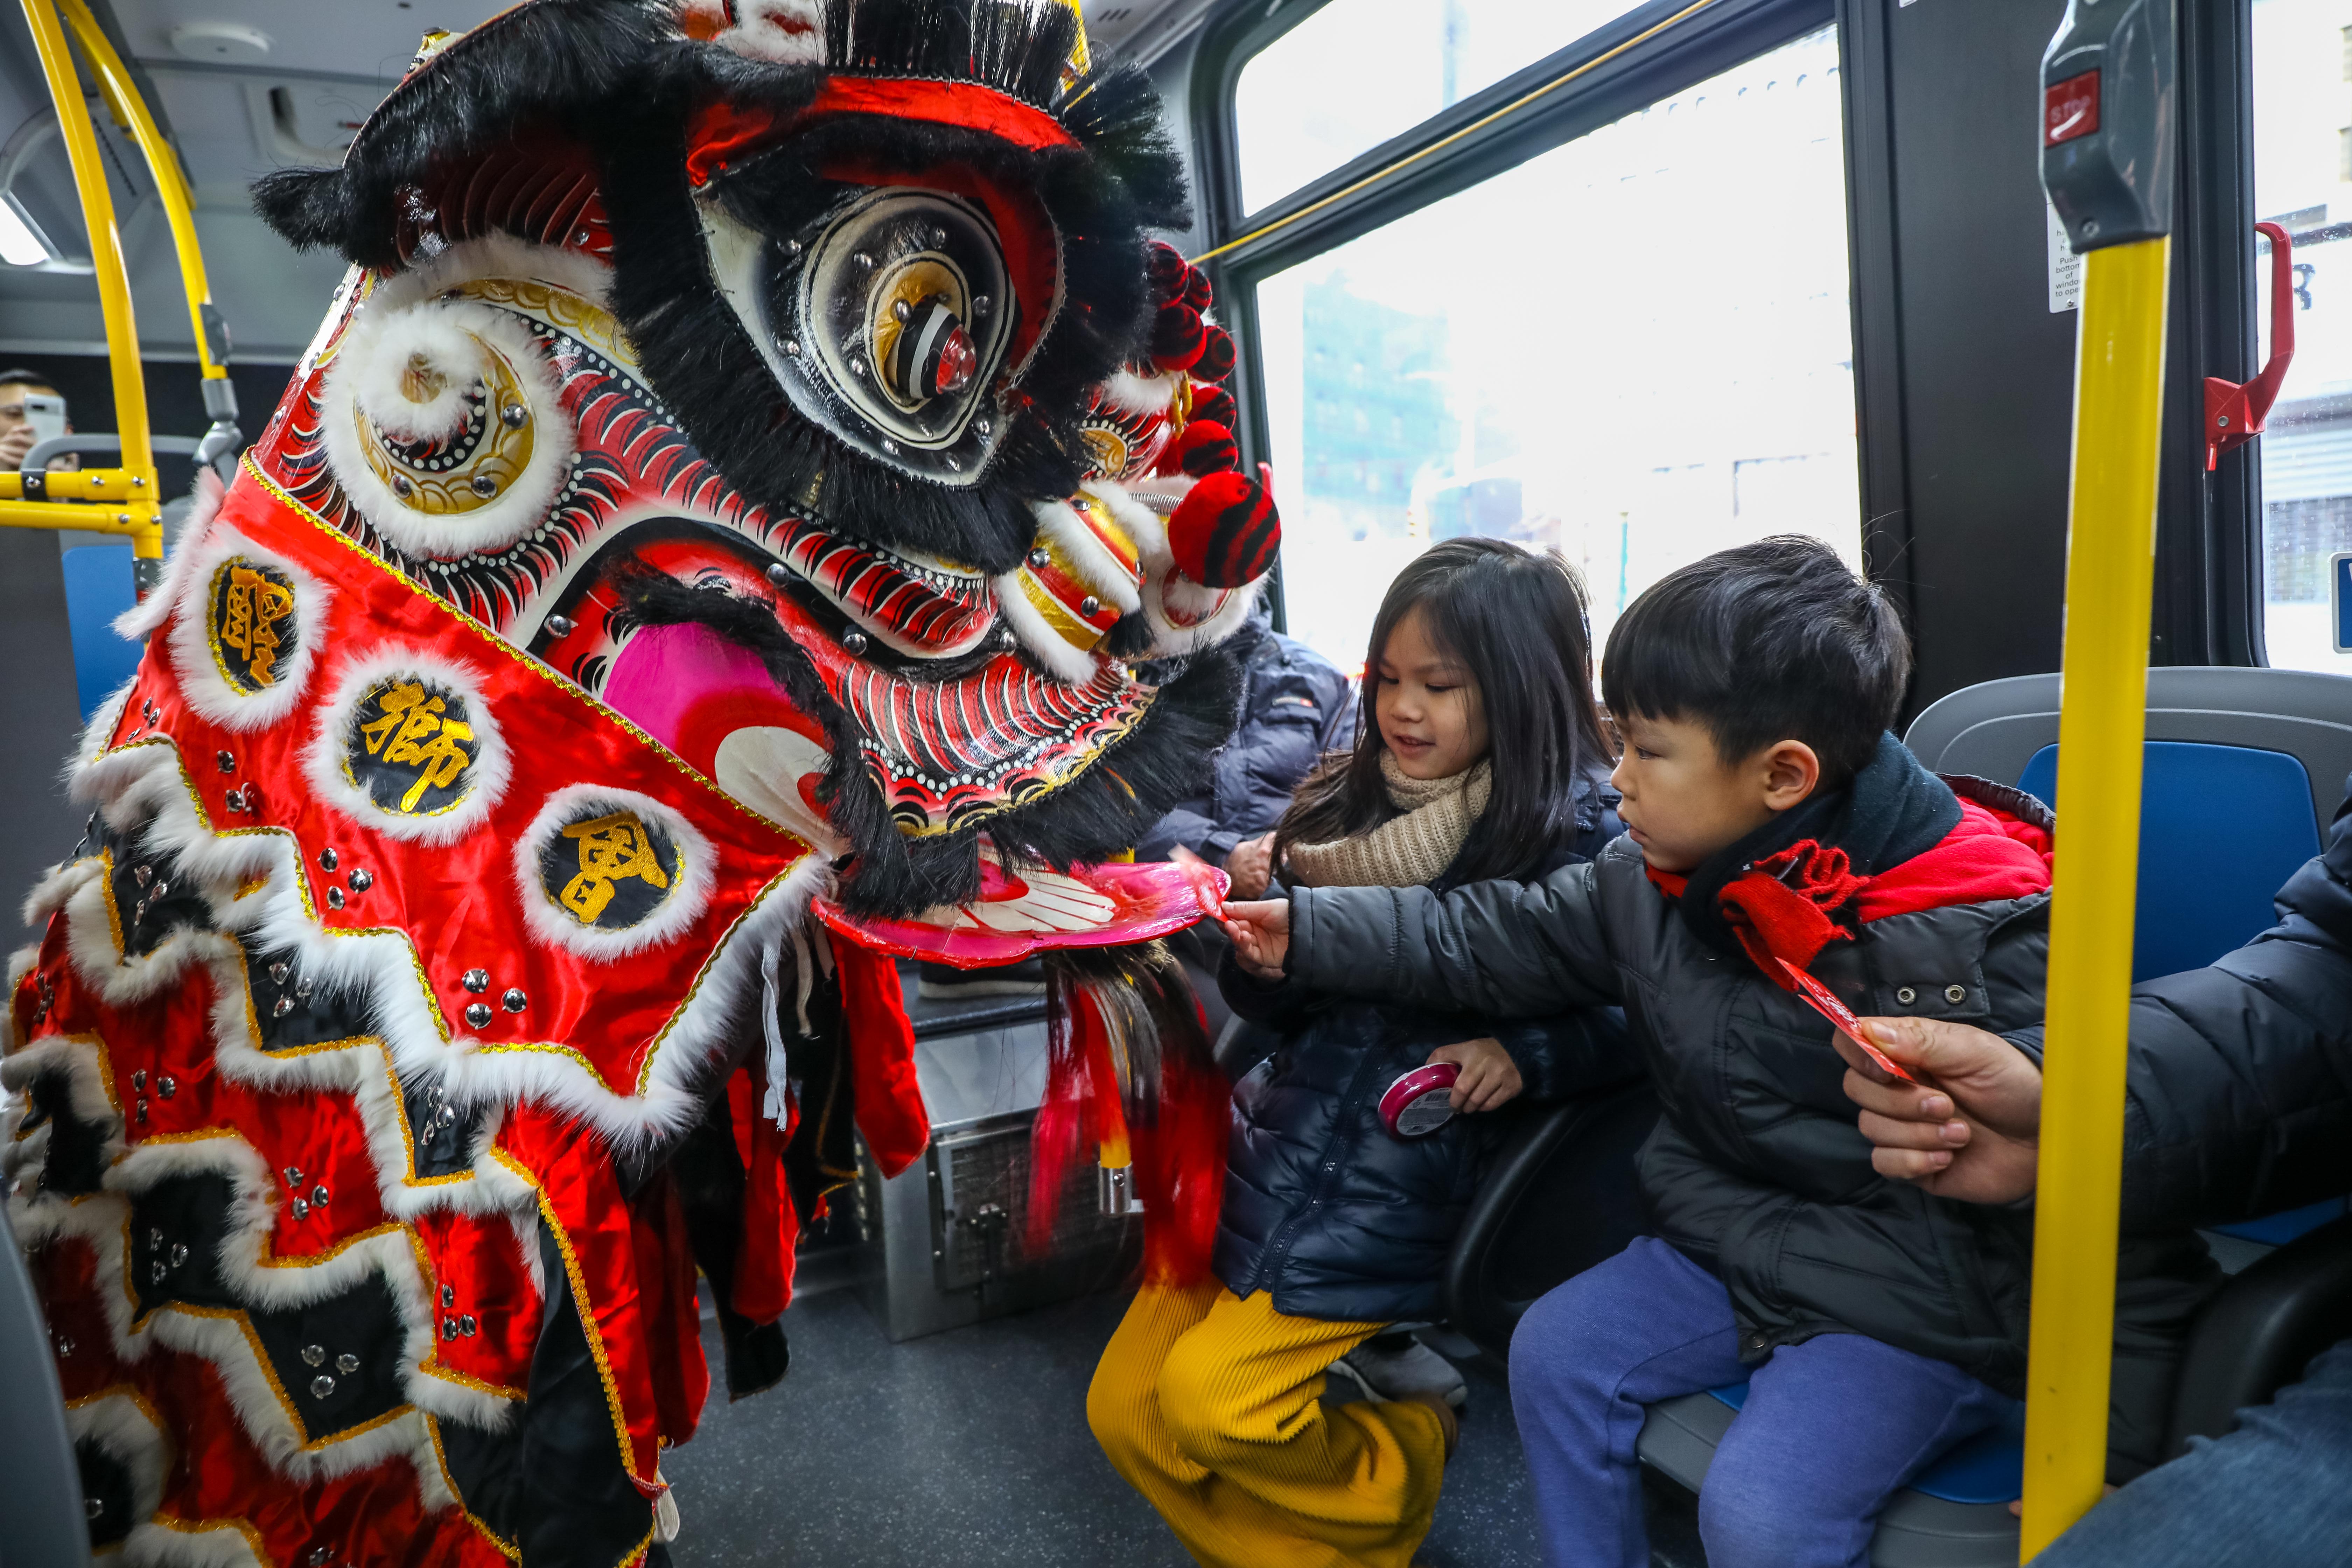 PHOTOS: MTA Celebrates Lunar New Year with Lion Dancers and OMNY Card Giveaway